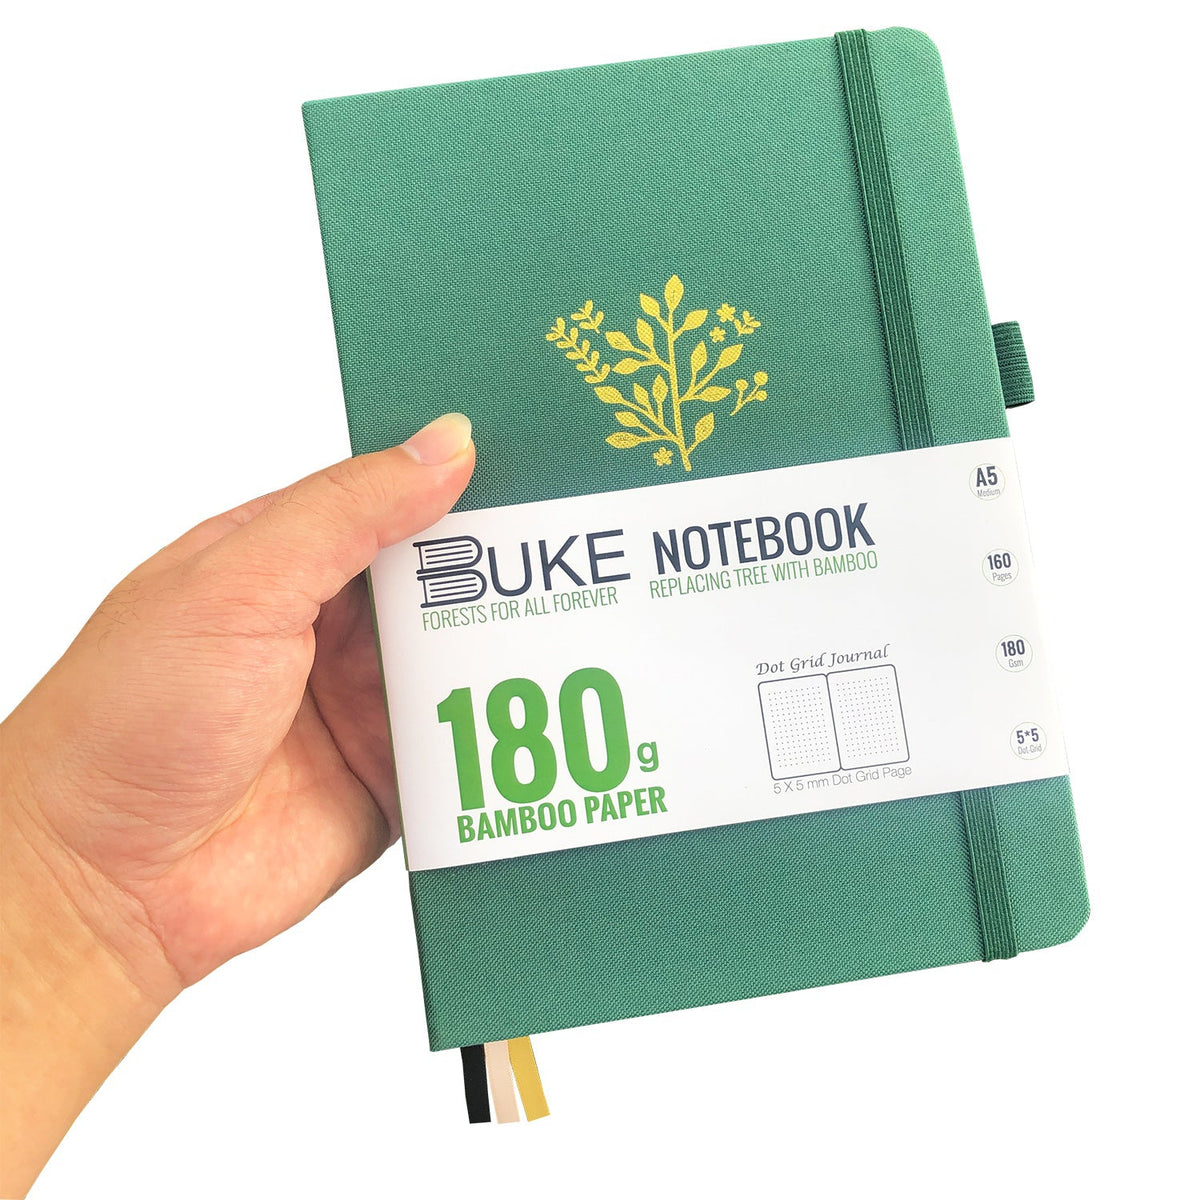 BUKE 180g Bamboo Paper - Bullet Dotted Journal - Forest Green Fabric Hardcover